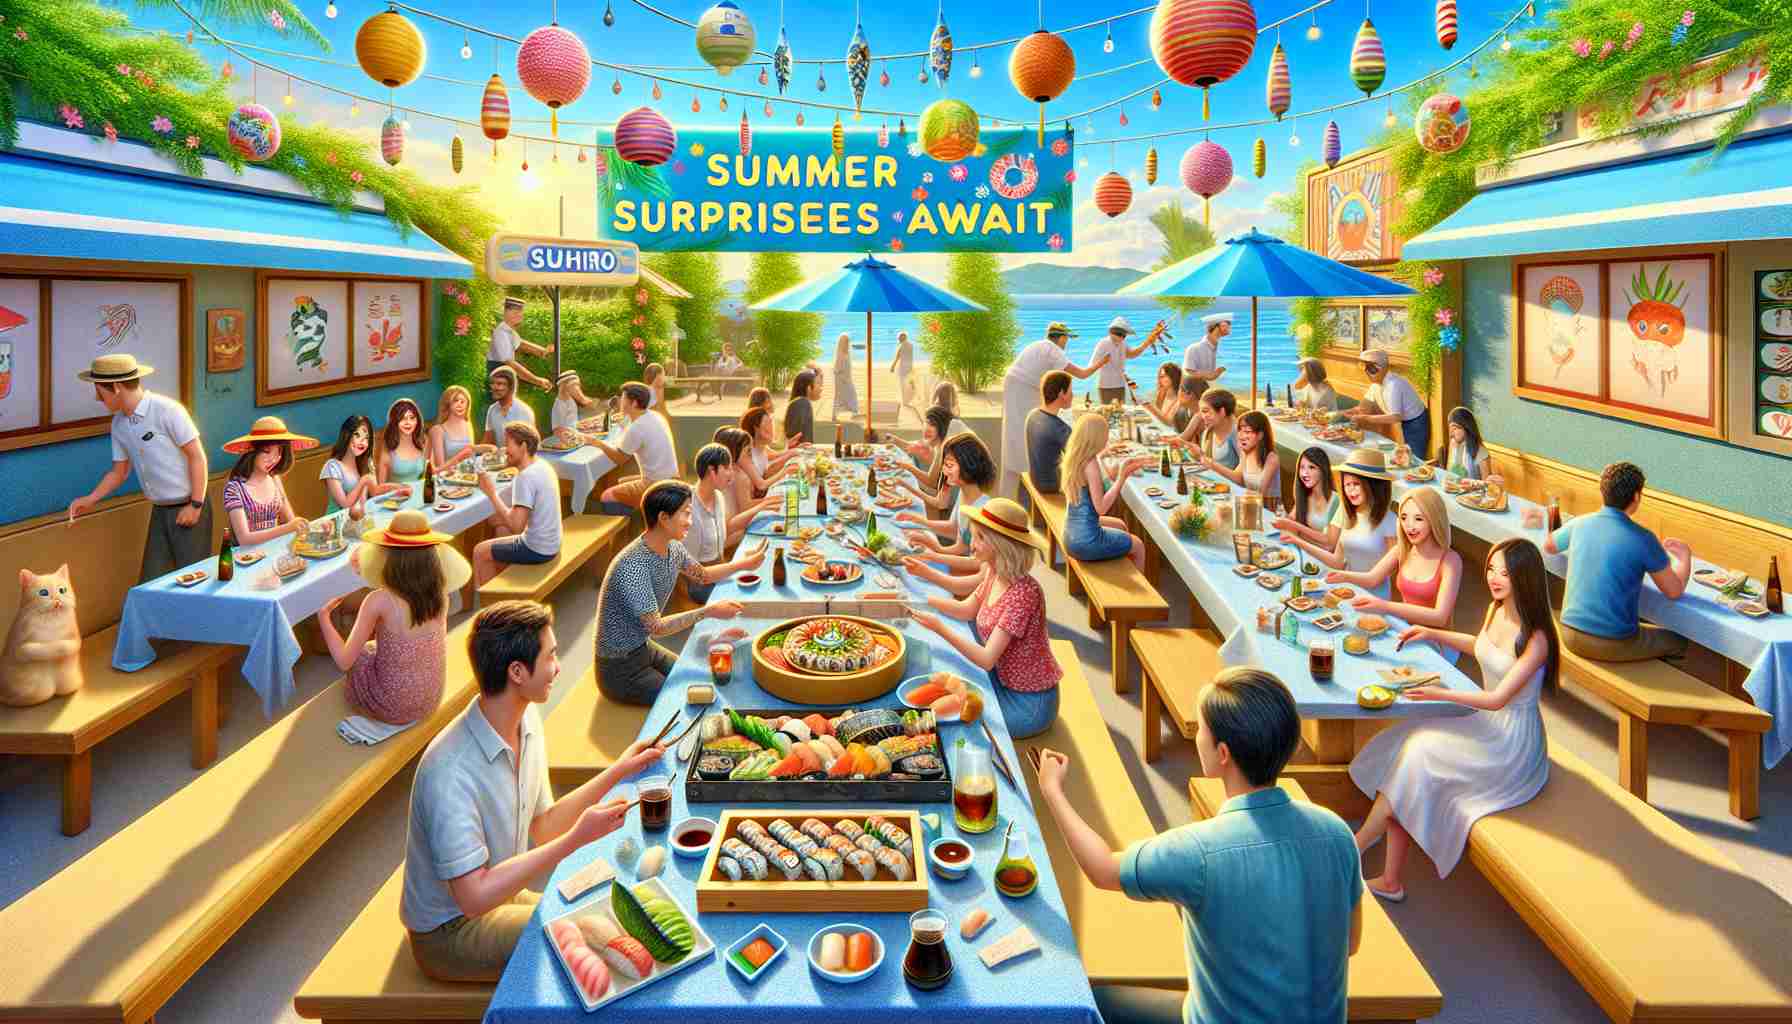 Create a life-like, high definition image of an exciting summer scene happening at a sushi restaurant named Sushiro. There is a clear blue sky outside, the sun is shining brightly, and customers of various genders and descents are happily enjoying their sushi meals. Festive decorations with common summer symbols are adorning the walls and the staff is busily serving the customers. In the center of the restaurant, there's a table with a brightly colored sign saying 'Summer Surprises Await'. There are intriguing, covered dishes arranged on that table, suggesting a special summer menu or offer.